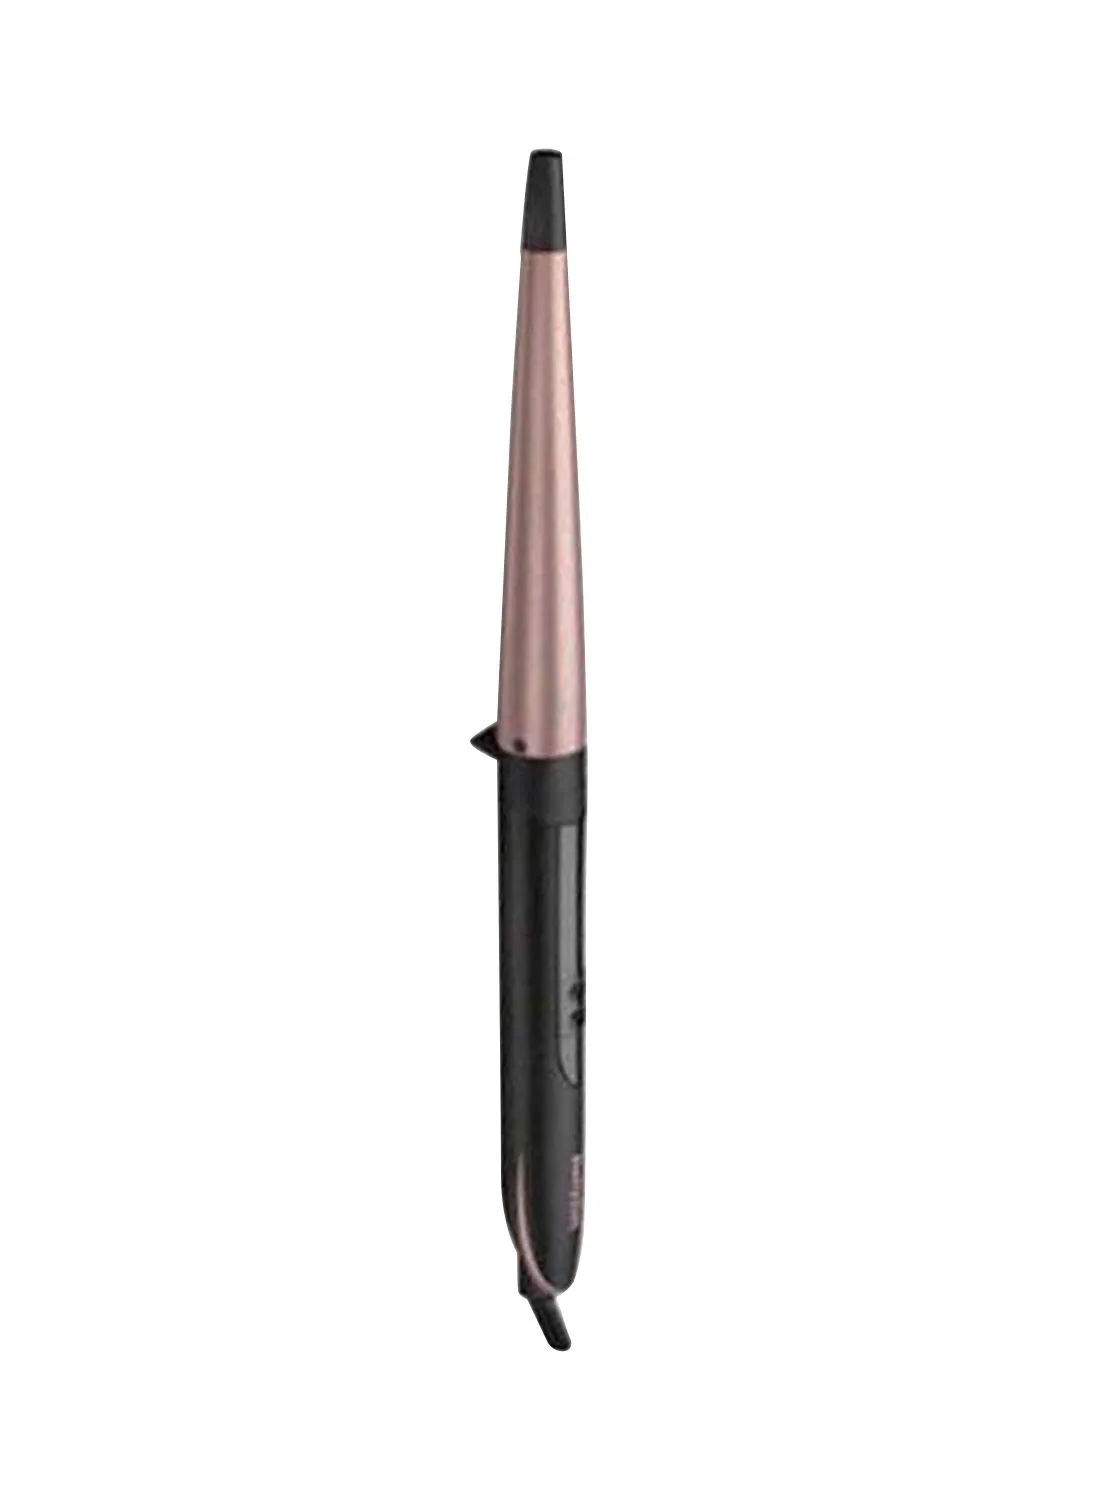 babyliss Conical Hair Curler, Ultra-fast Heat Up & Extra-long Barrel, On/off Button, Auto Shut Off With Ceramic Technology, 6 Heat Settings From 160c-210c, C454SDE Pink/Black